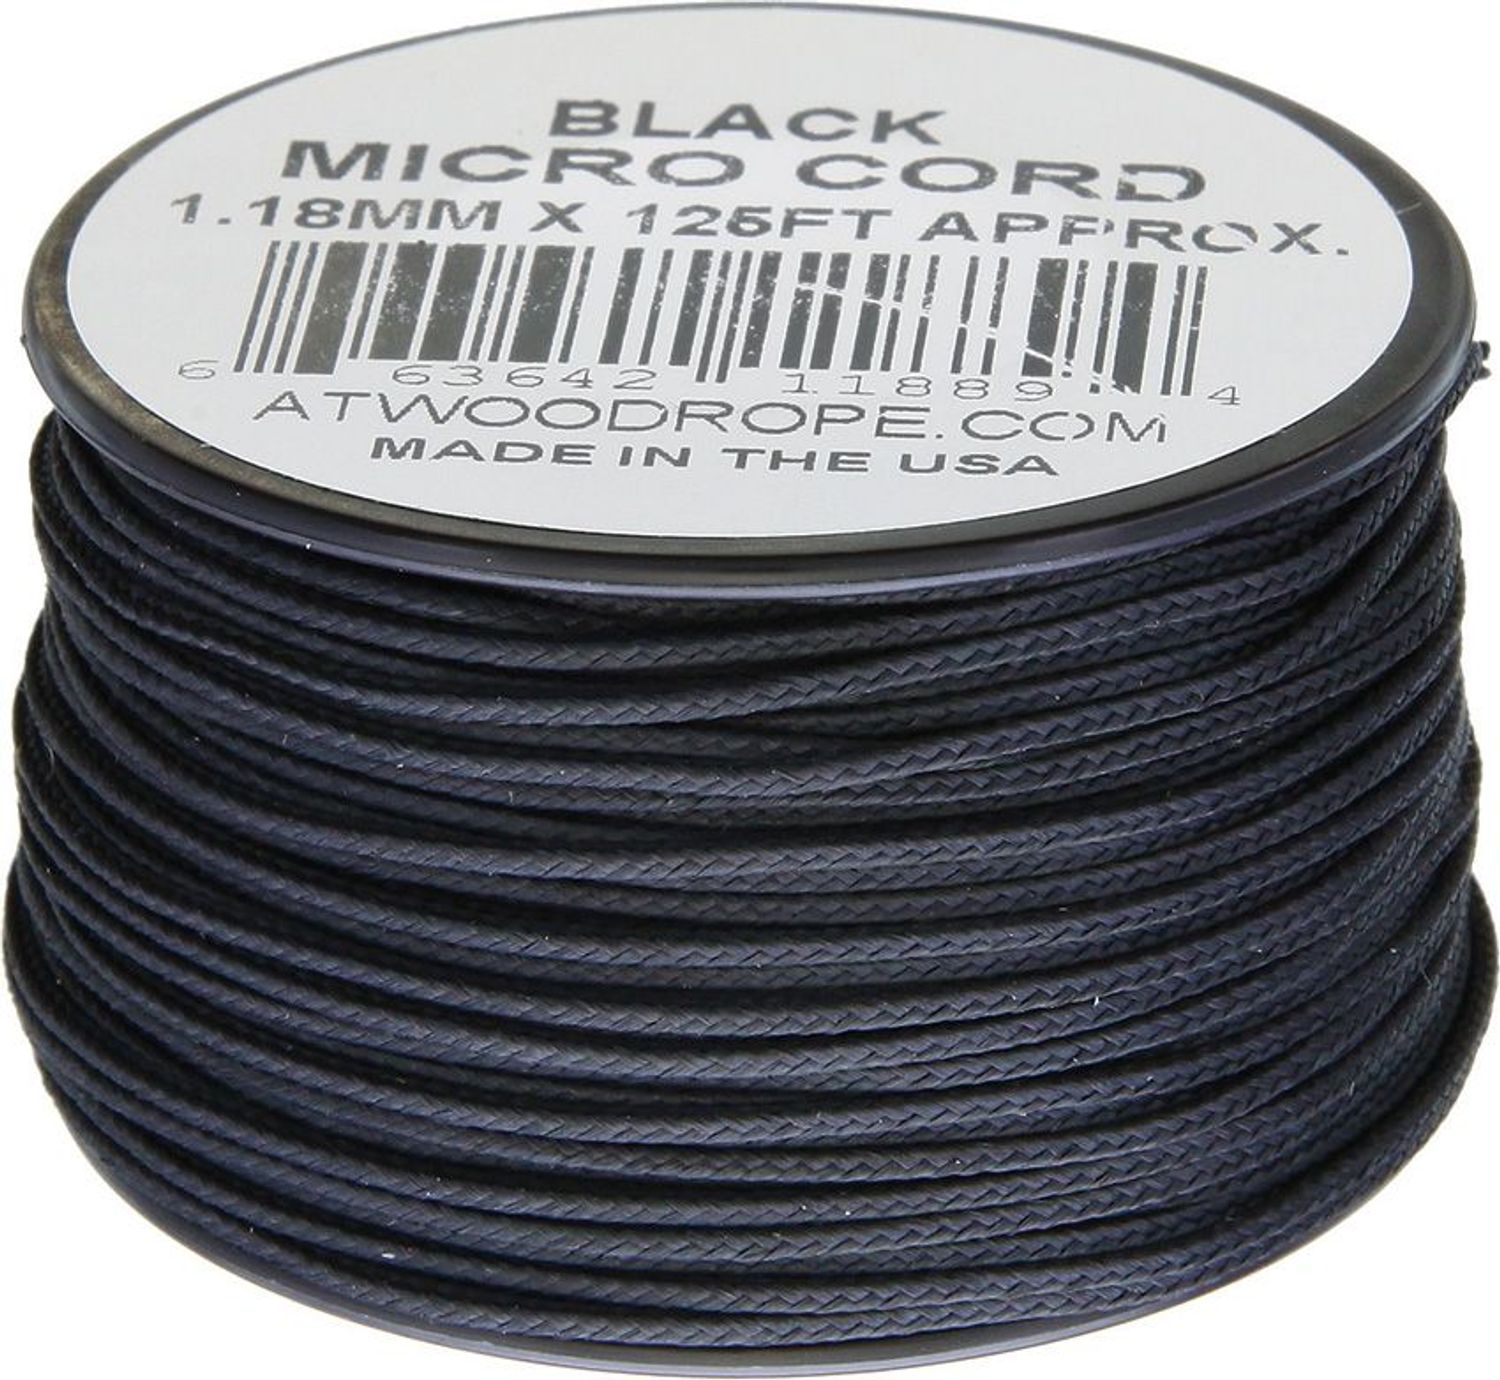 Atwood Rope Micro Cord, Black, 125 Feet - KnifeCenter - RG1267